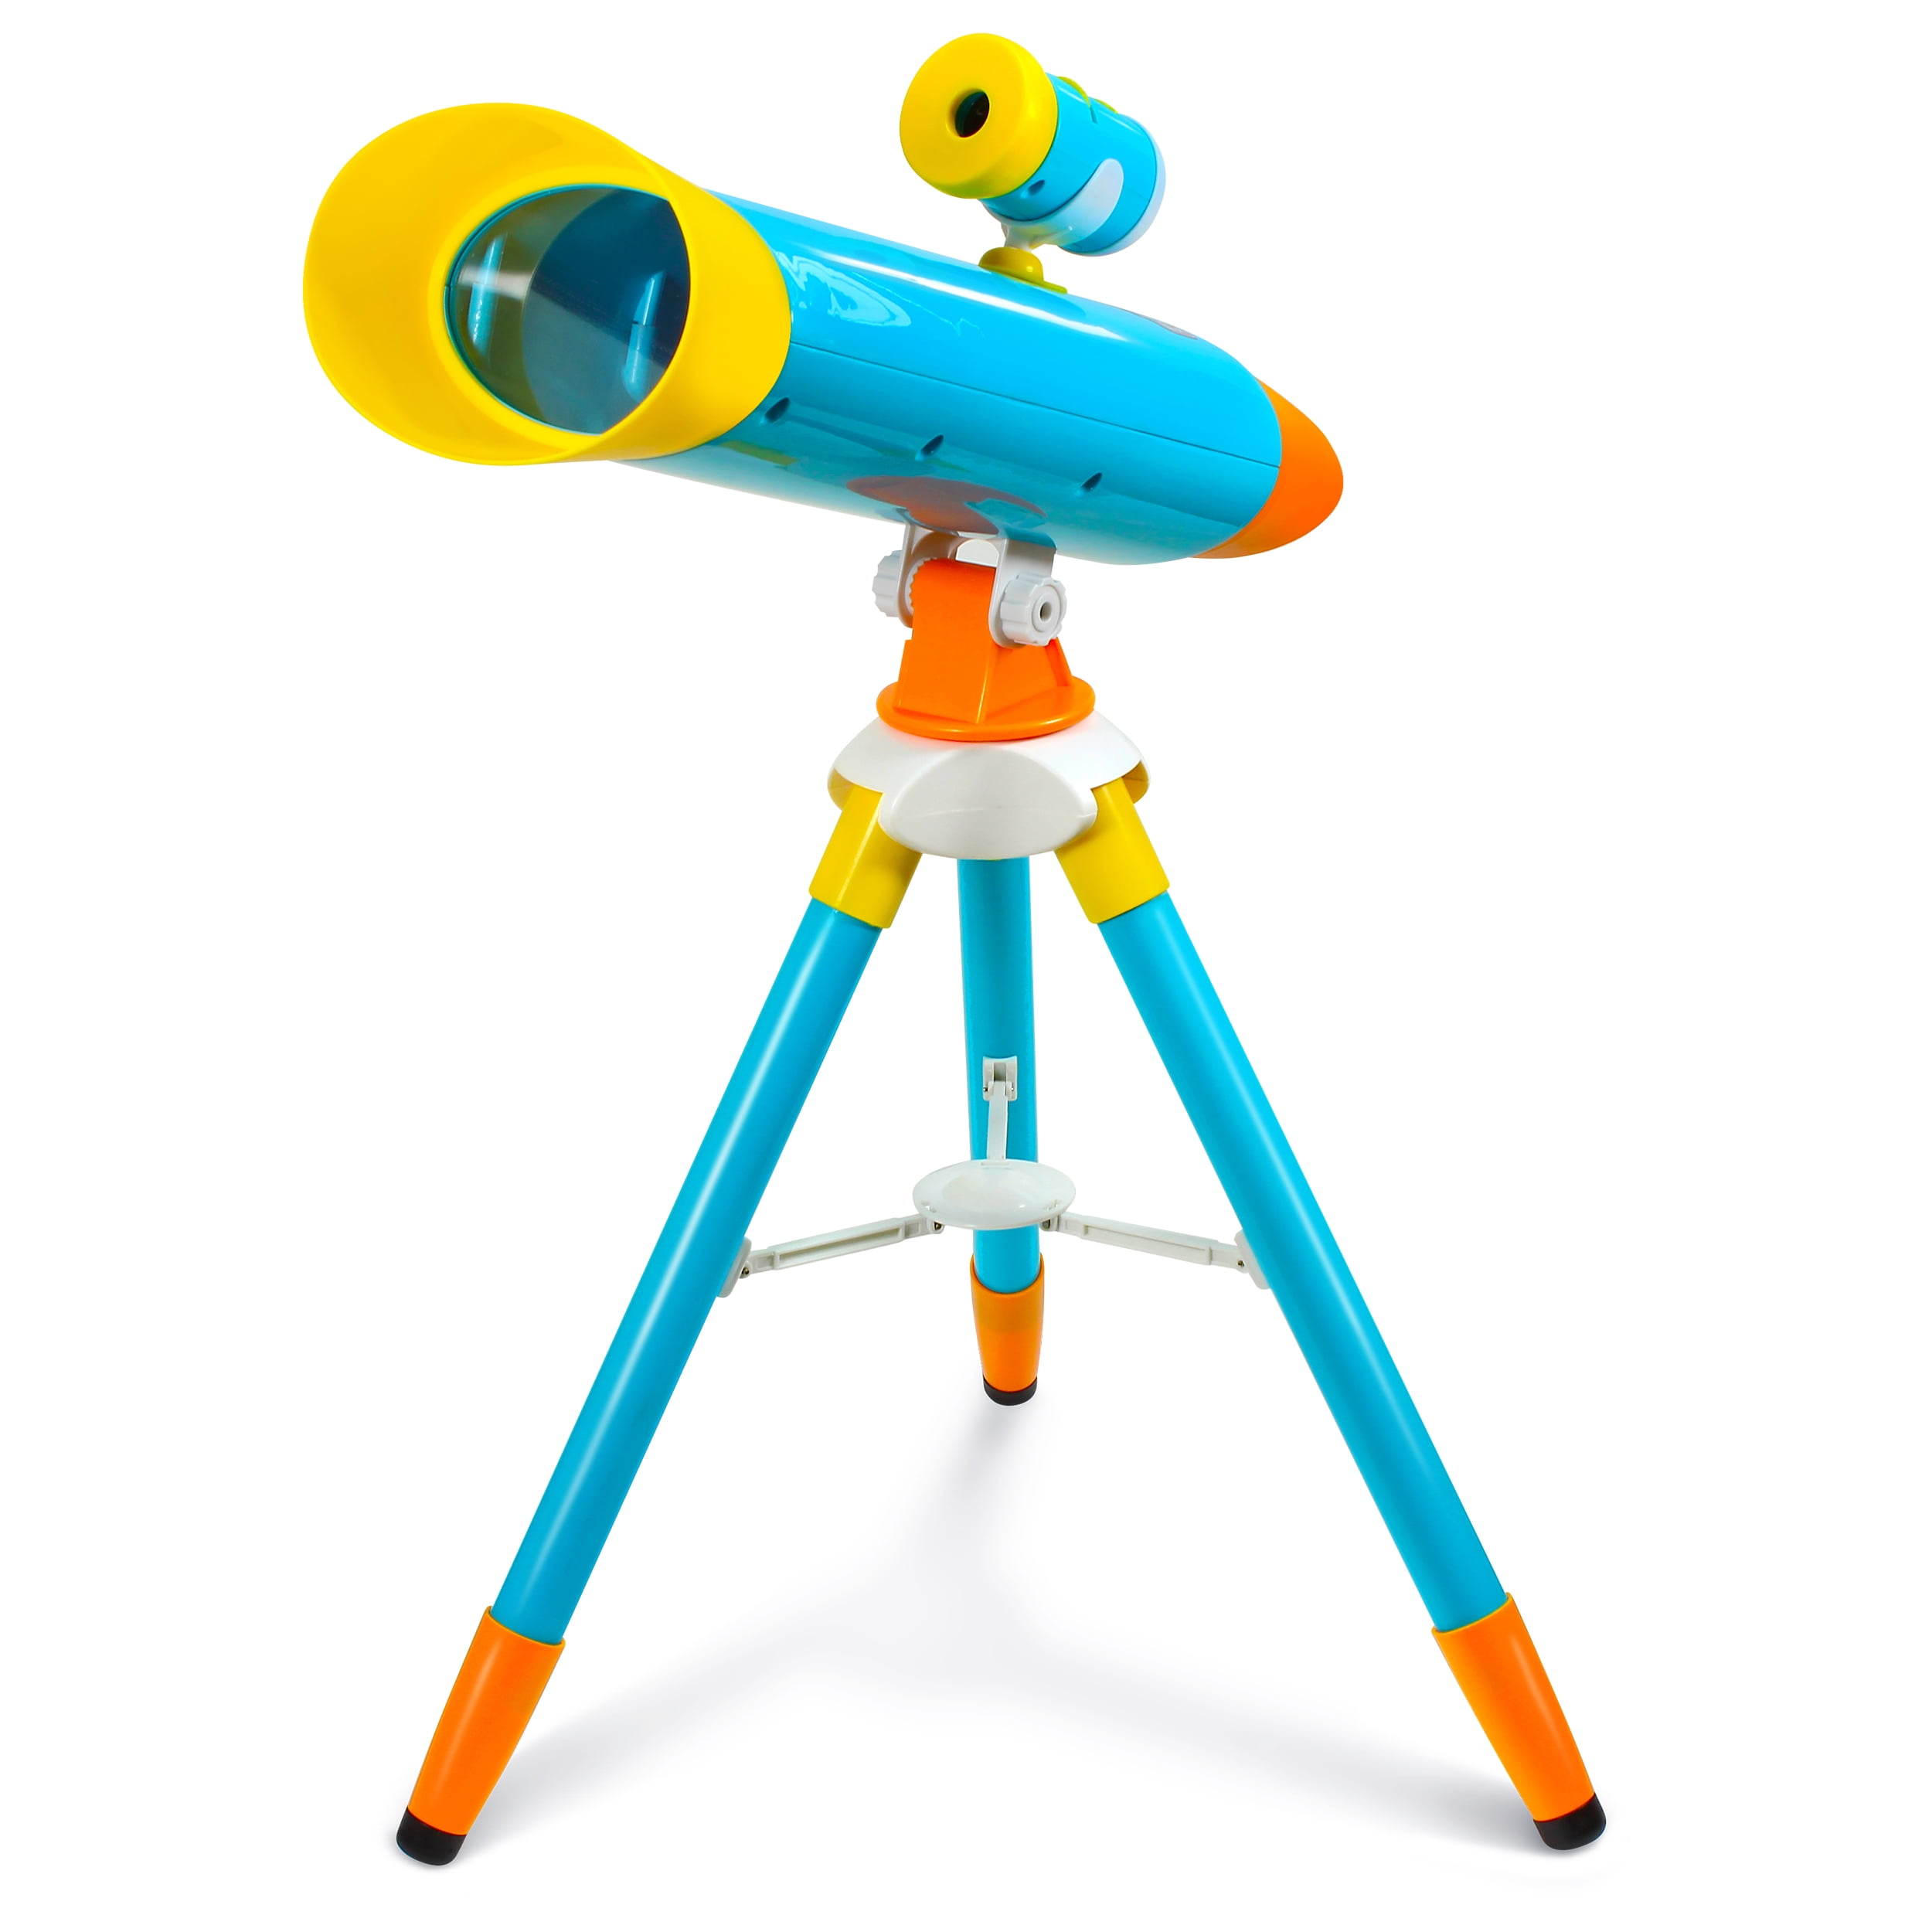 Telescope for Kids Binoculars for Kids Telescopes for Beginners Capable of 6x36 Magnification Finder Scope Ideal Birthday Space Gift for Bird Watching Camping Outdoor Play 